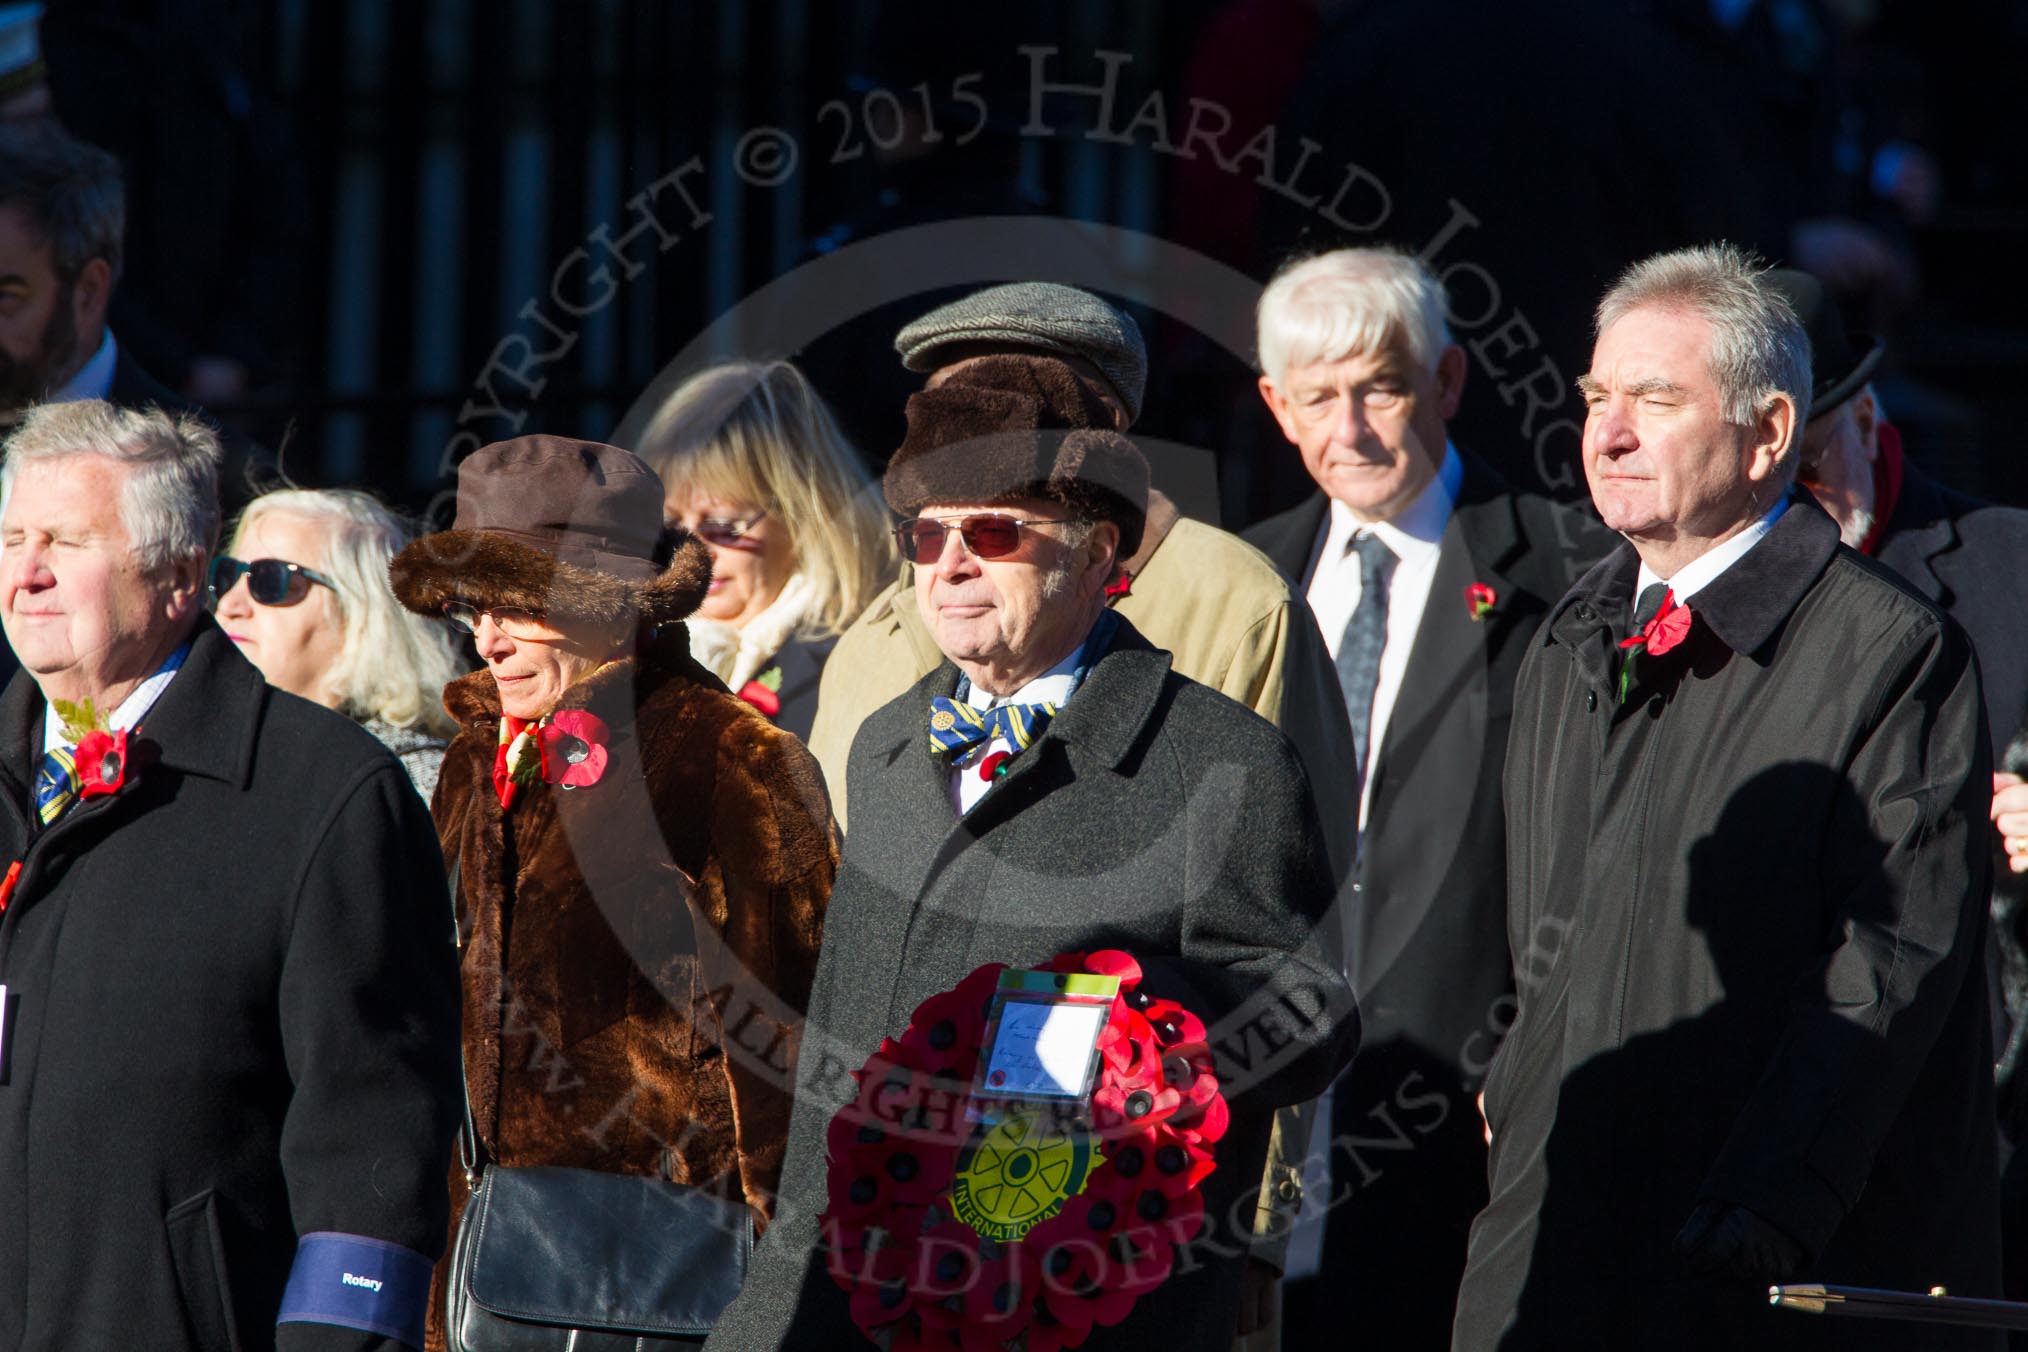 Remembrance Sunday Cenotaph March Past 2013: M41 - Rotary International..
Press stand opposite the Foreign Office building, Whitehall, London SW1,
London,
Greater London,
United Kingdom,
on 10 November 2013 at 12:14, image #2195